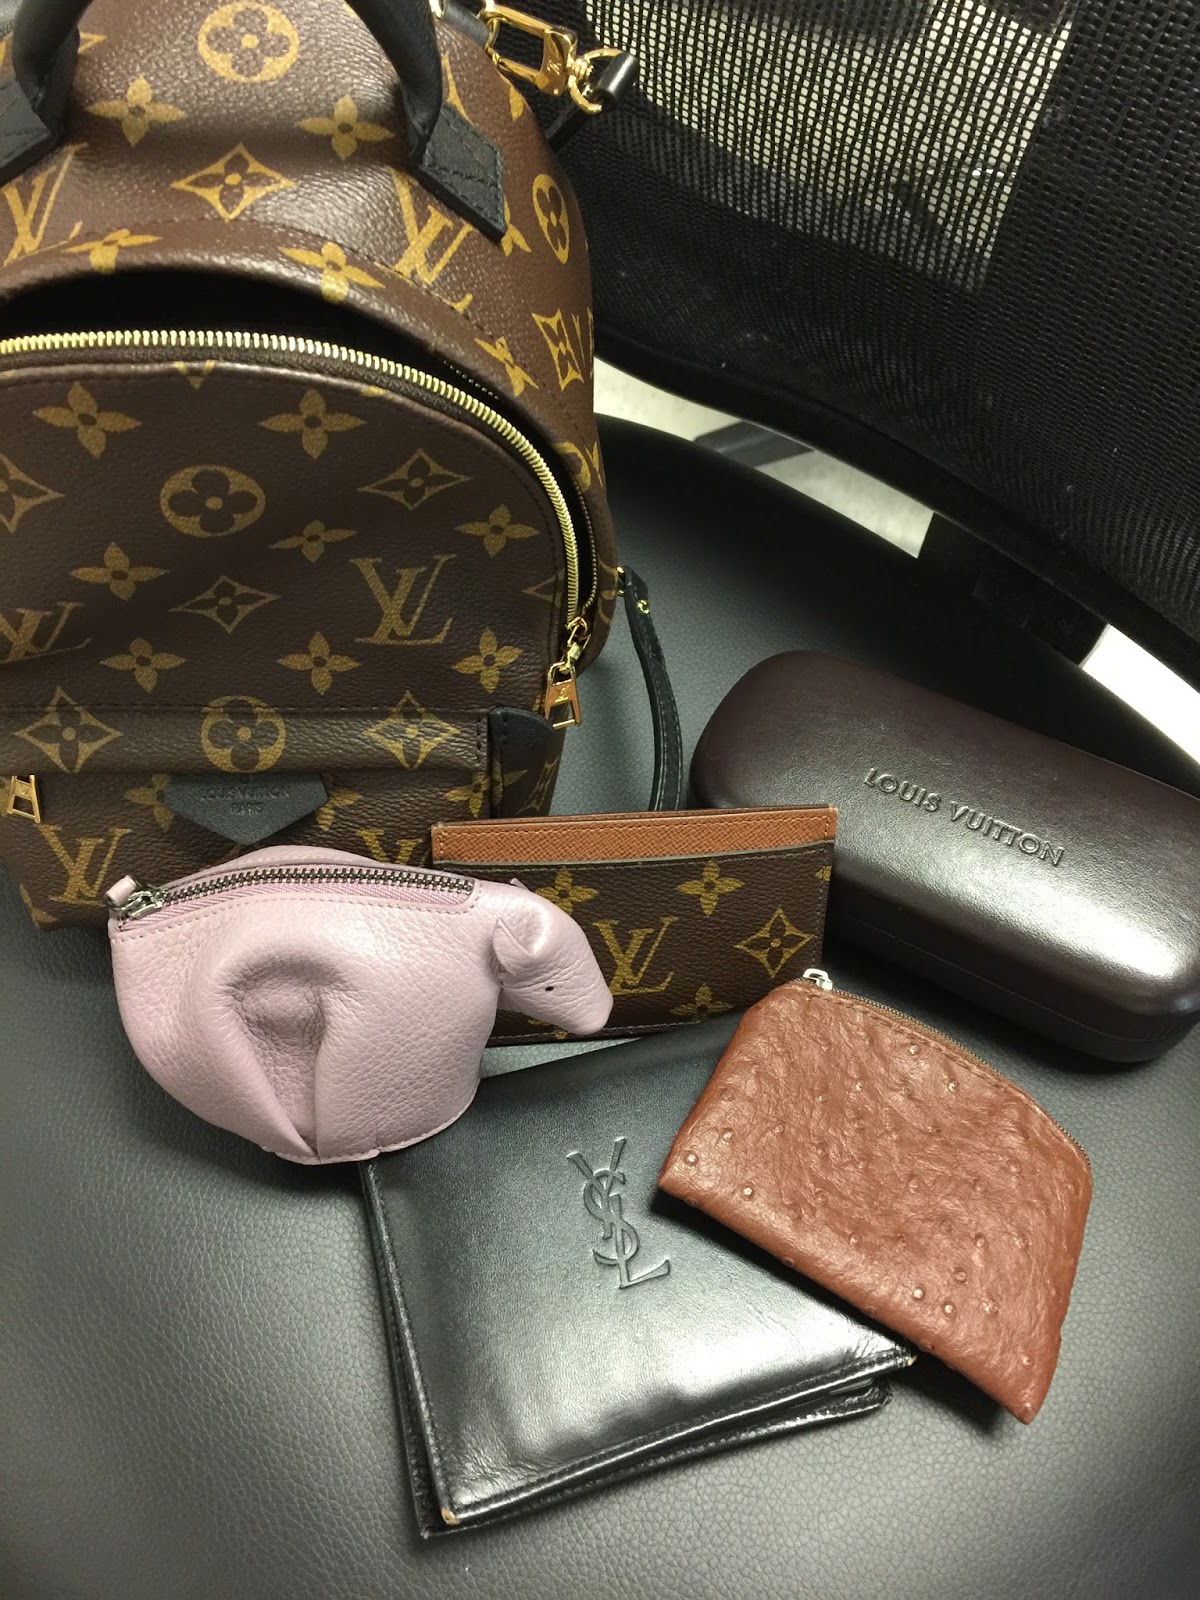 In LVoe with Louis Vuitton: LOUIS VUITTON Palm Springs Backpack MINI